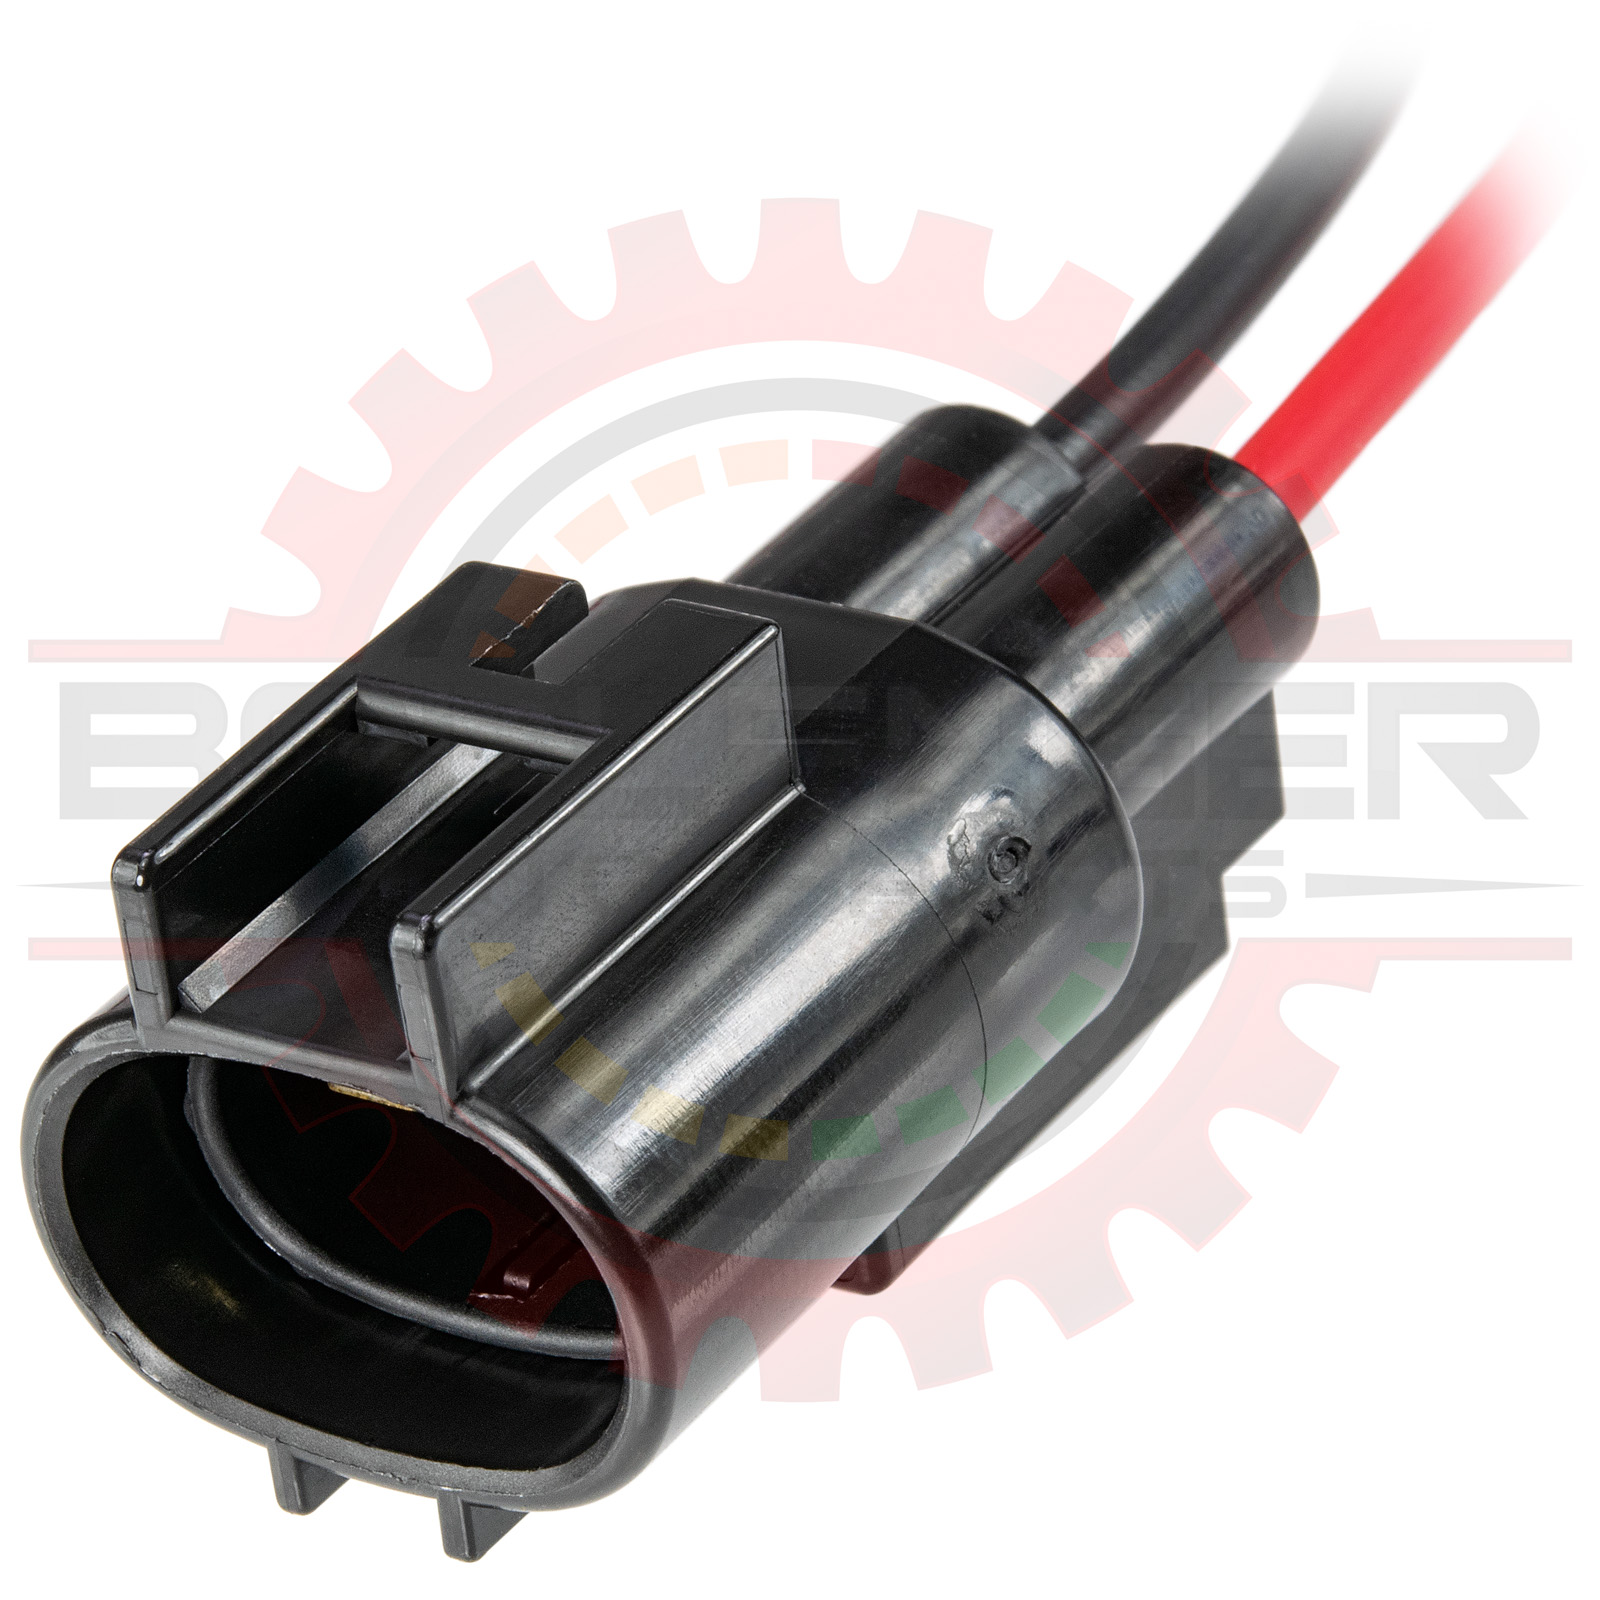 2 Way TS187 Receptacle Connector for Toyota Radiator Fan 